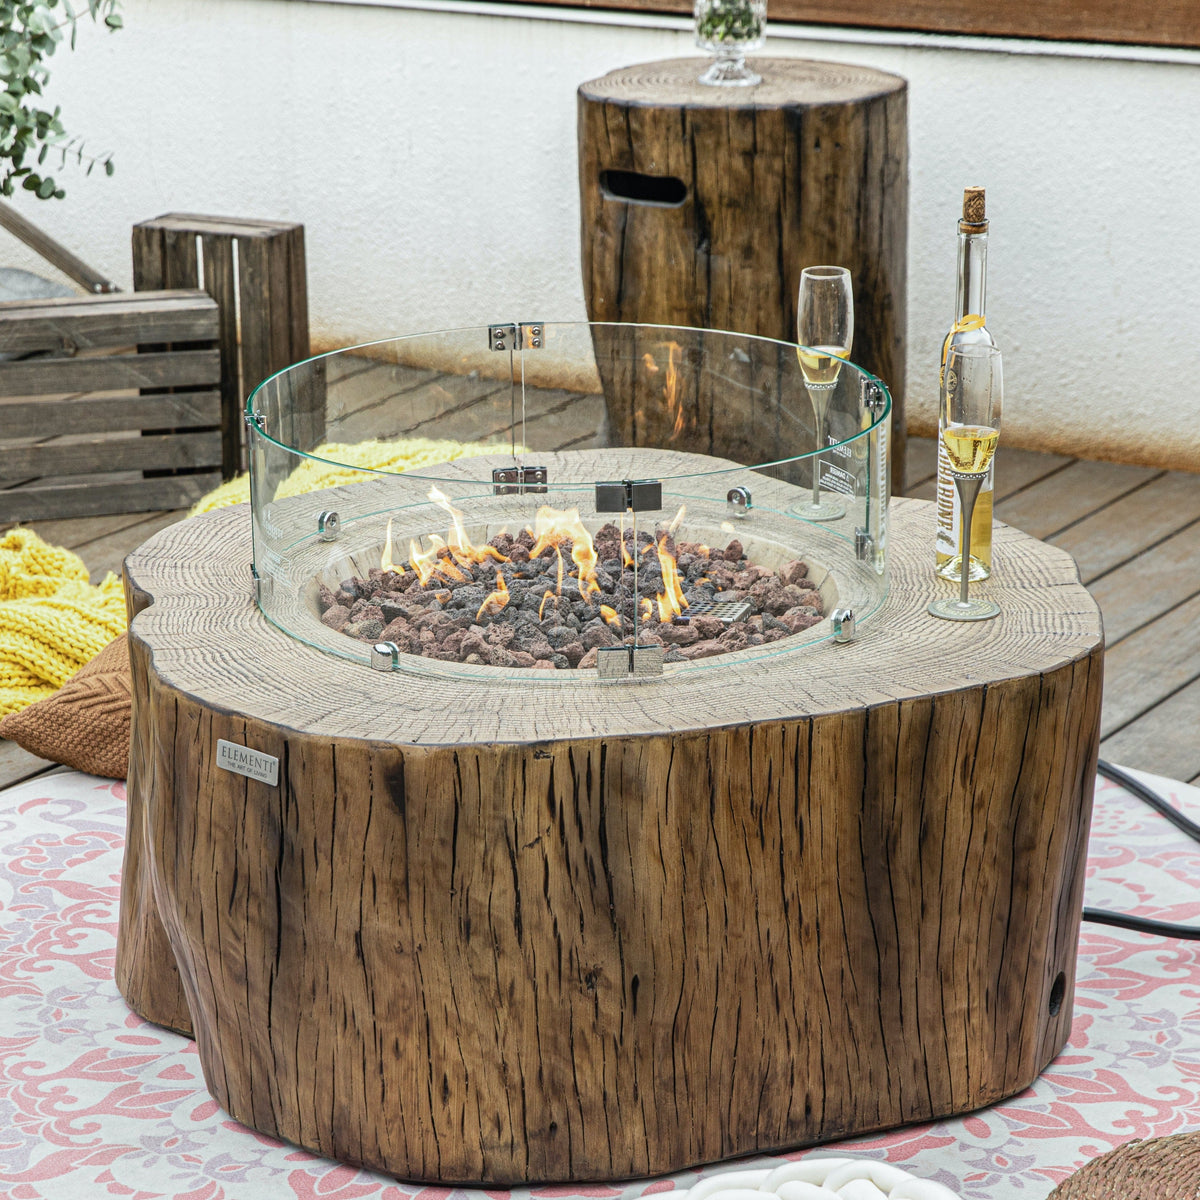 Elementi Manchester Fire Pit Table in Red Wood outdoor with windscreen